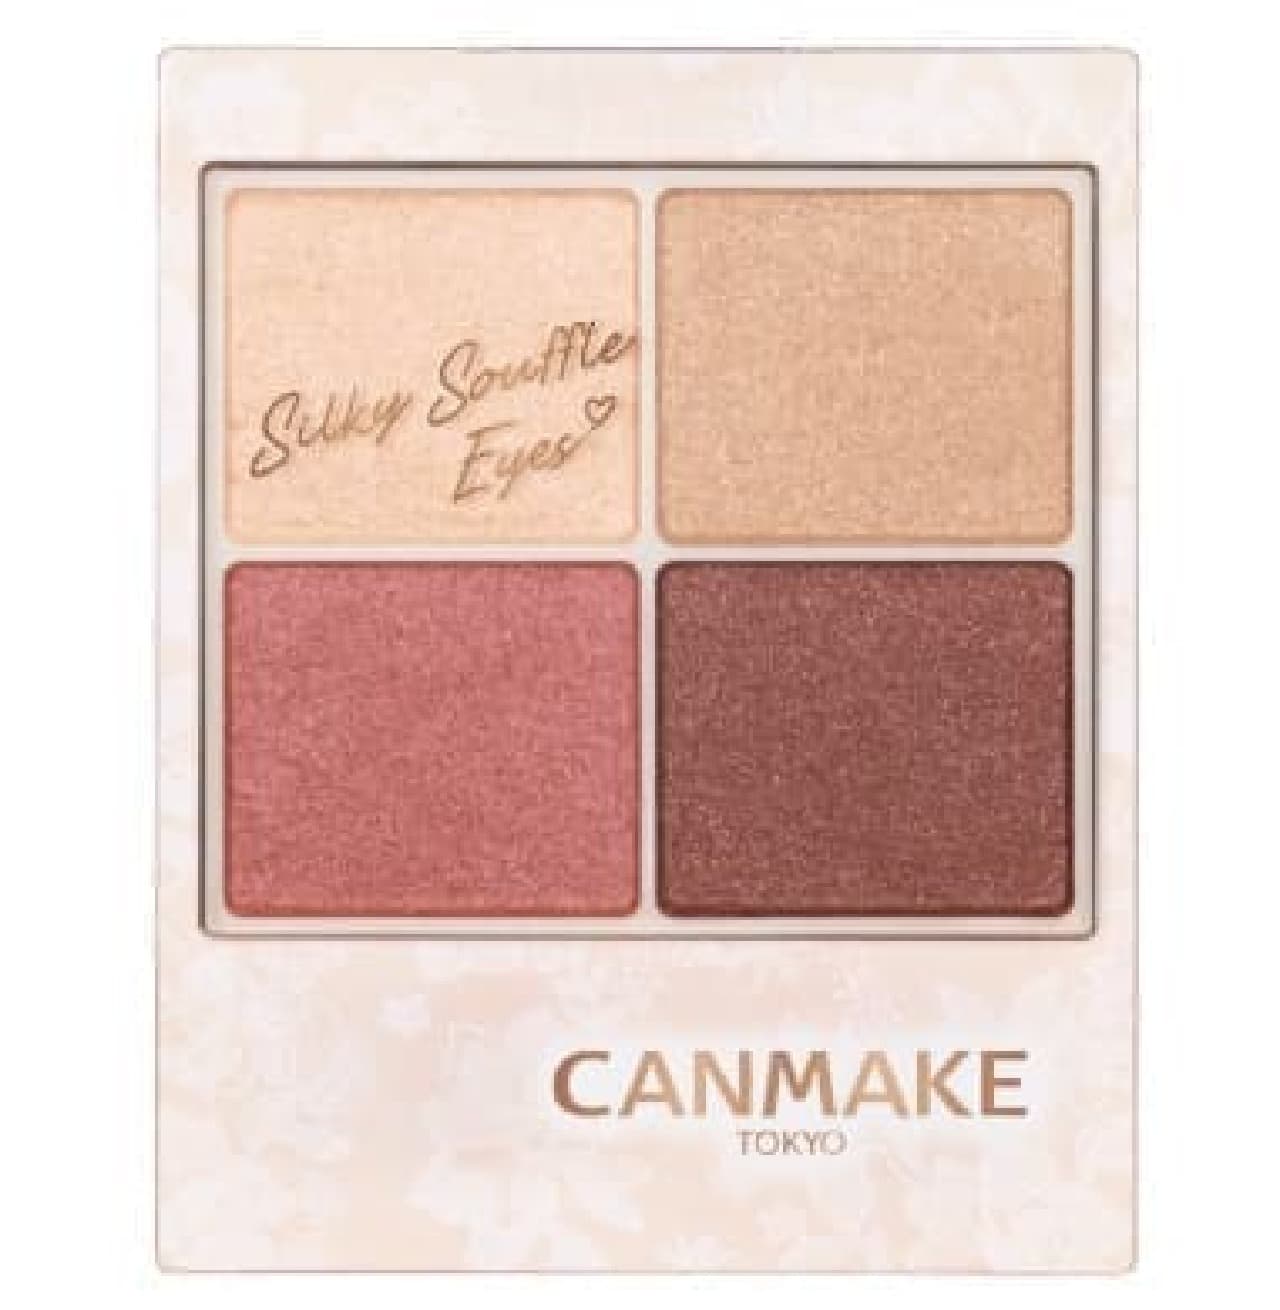 Canmake Silky Sflare Eyes 02